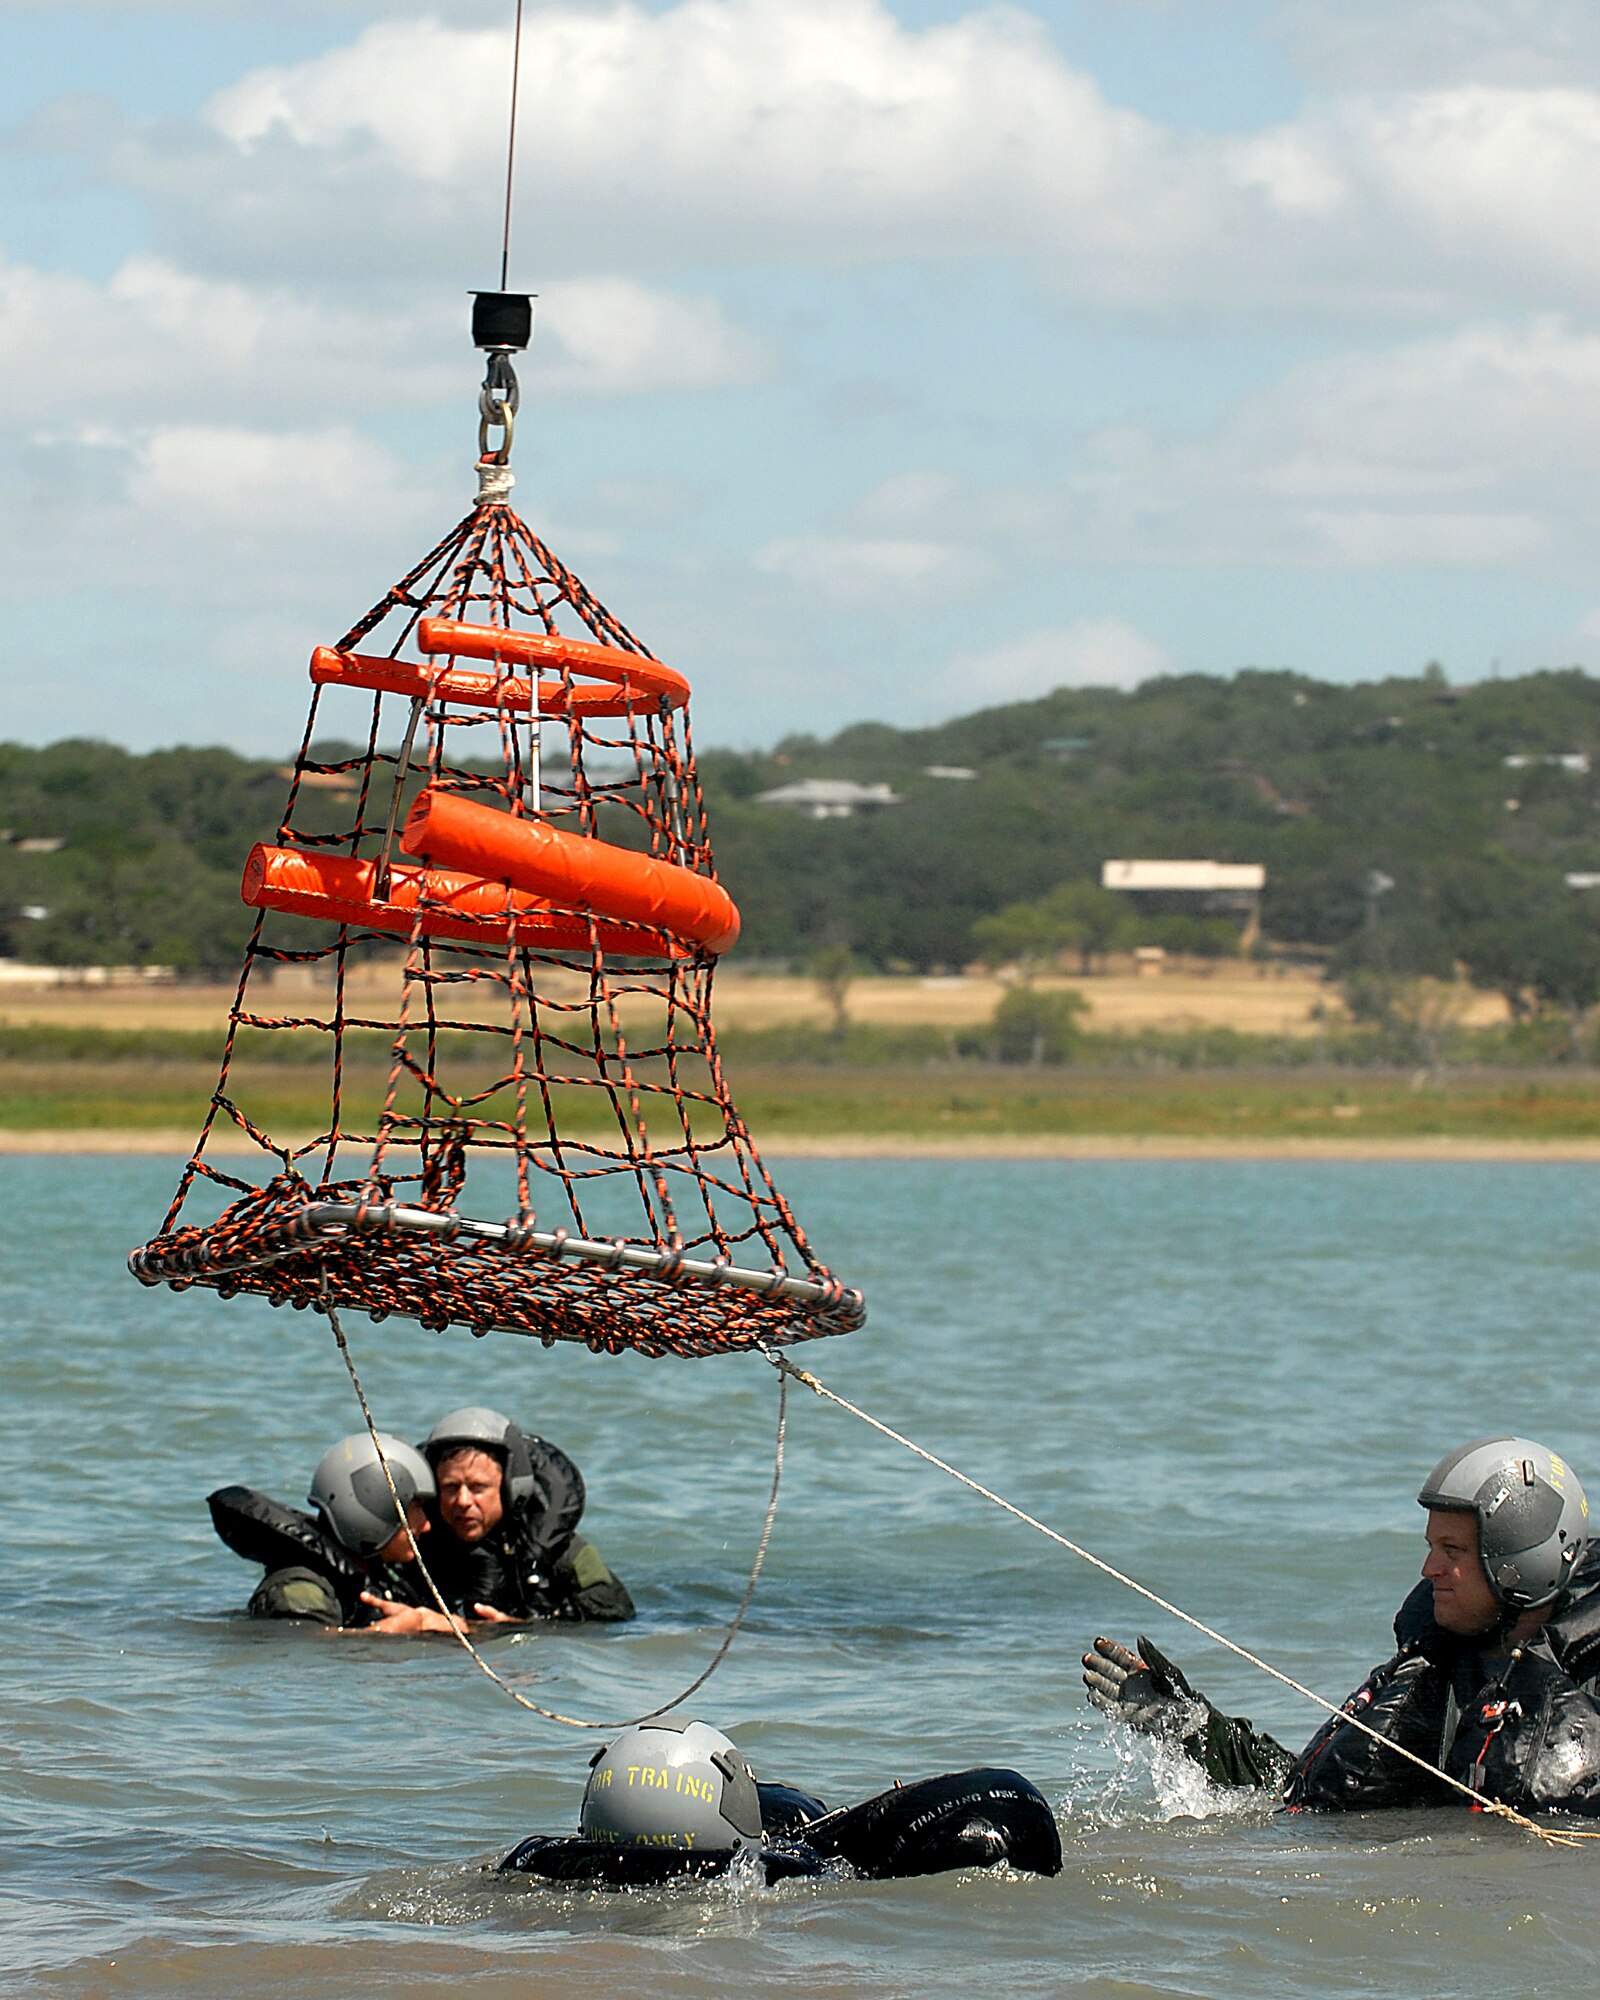 Lt. Col. Michael "Bones" McCoy (right), an F-16 pilot assigned to the 149th Fighter Wing, Texas Air National Guard, Lackland Air Force Base, Texas, guides an aerial rescue basket to other members.  Col. McCoy underwent water survival training as part of an annual training requirement at Canyon Lake, Texas, July 11, 2009.  (U.S. Air Force photo/Master Sgt. Robert Shelley)